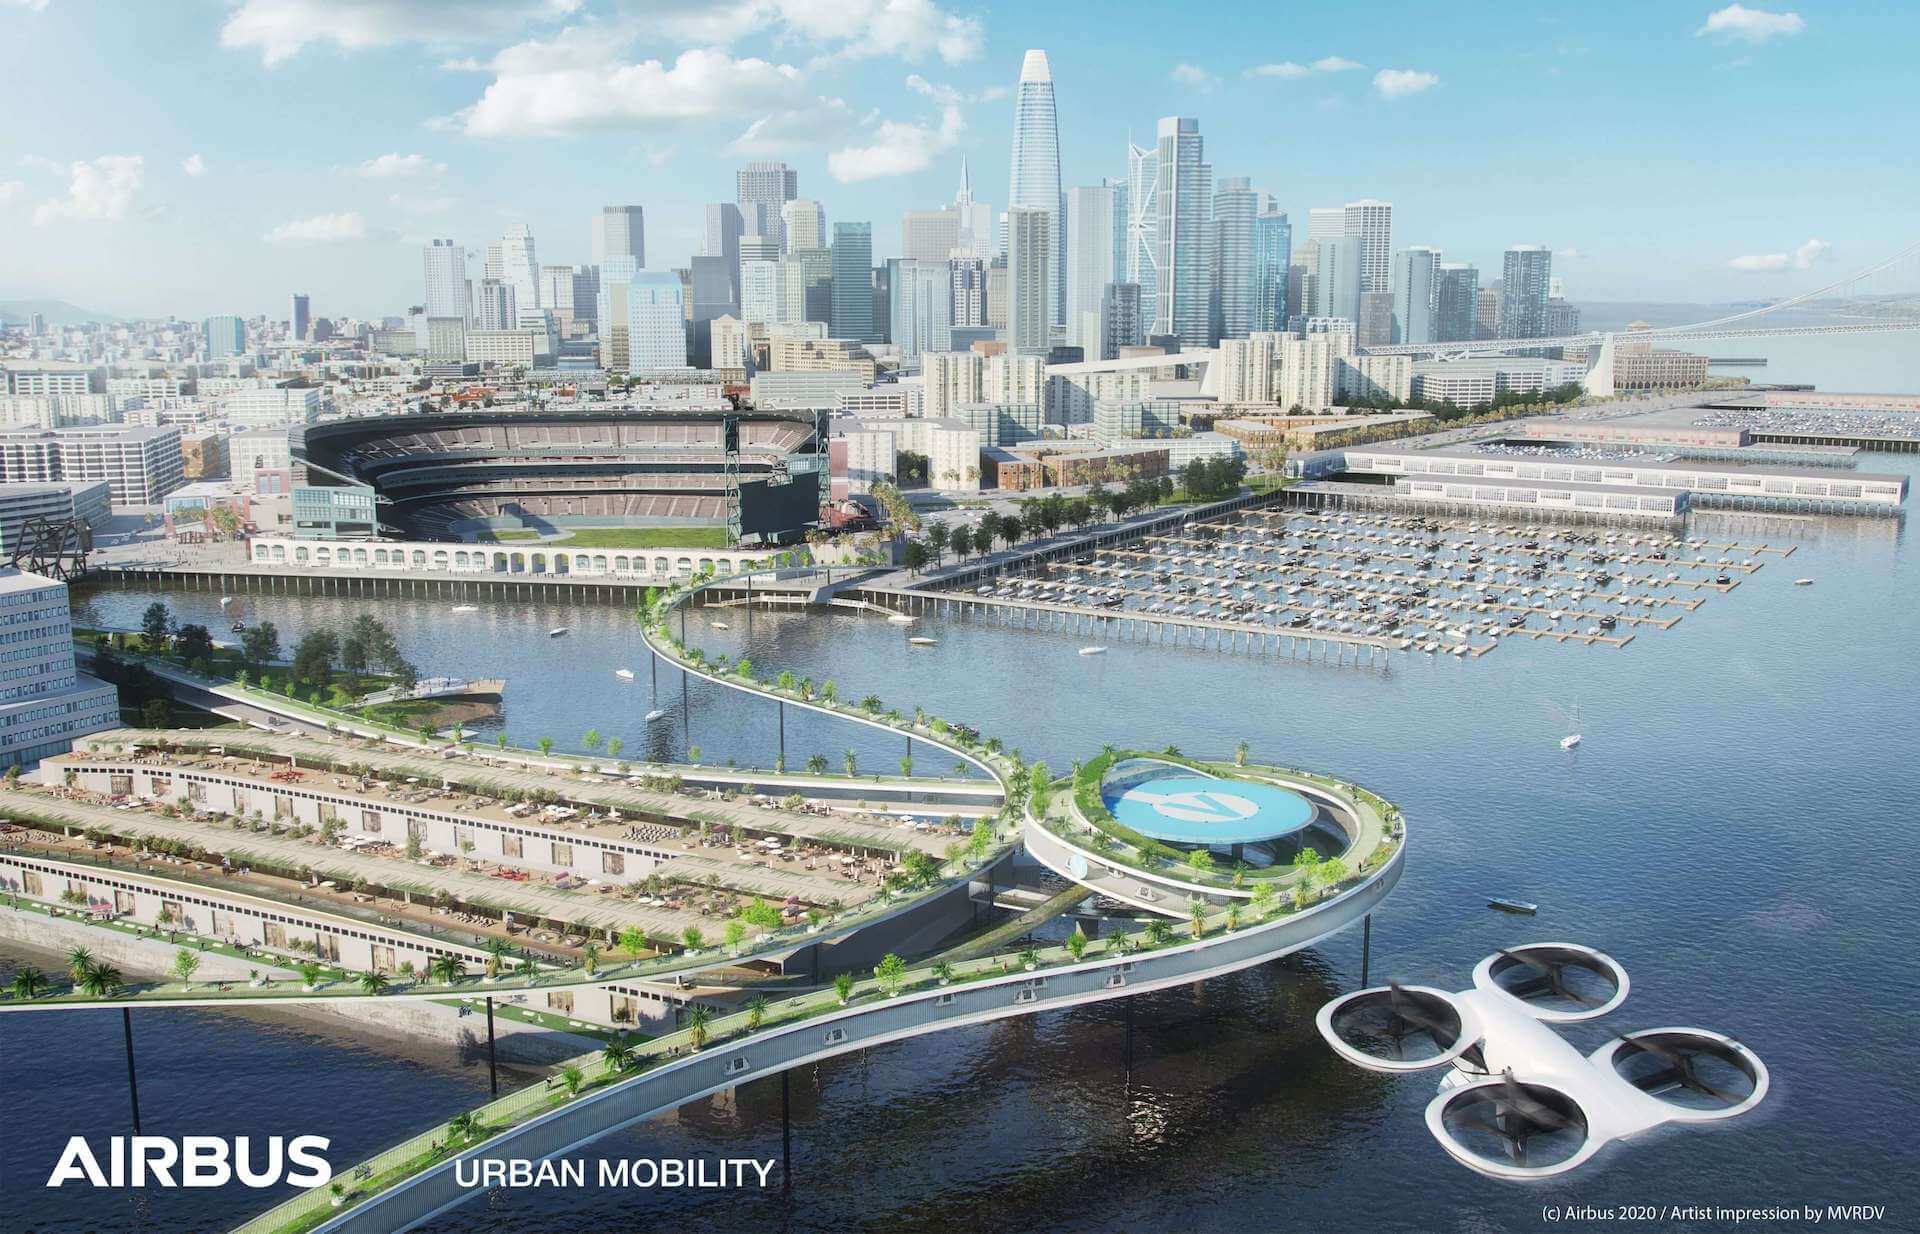 MVRDV and Airbus - AAUM Vertipad San Francisco Harbour - The future of Urban Air Mobility